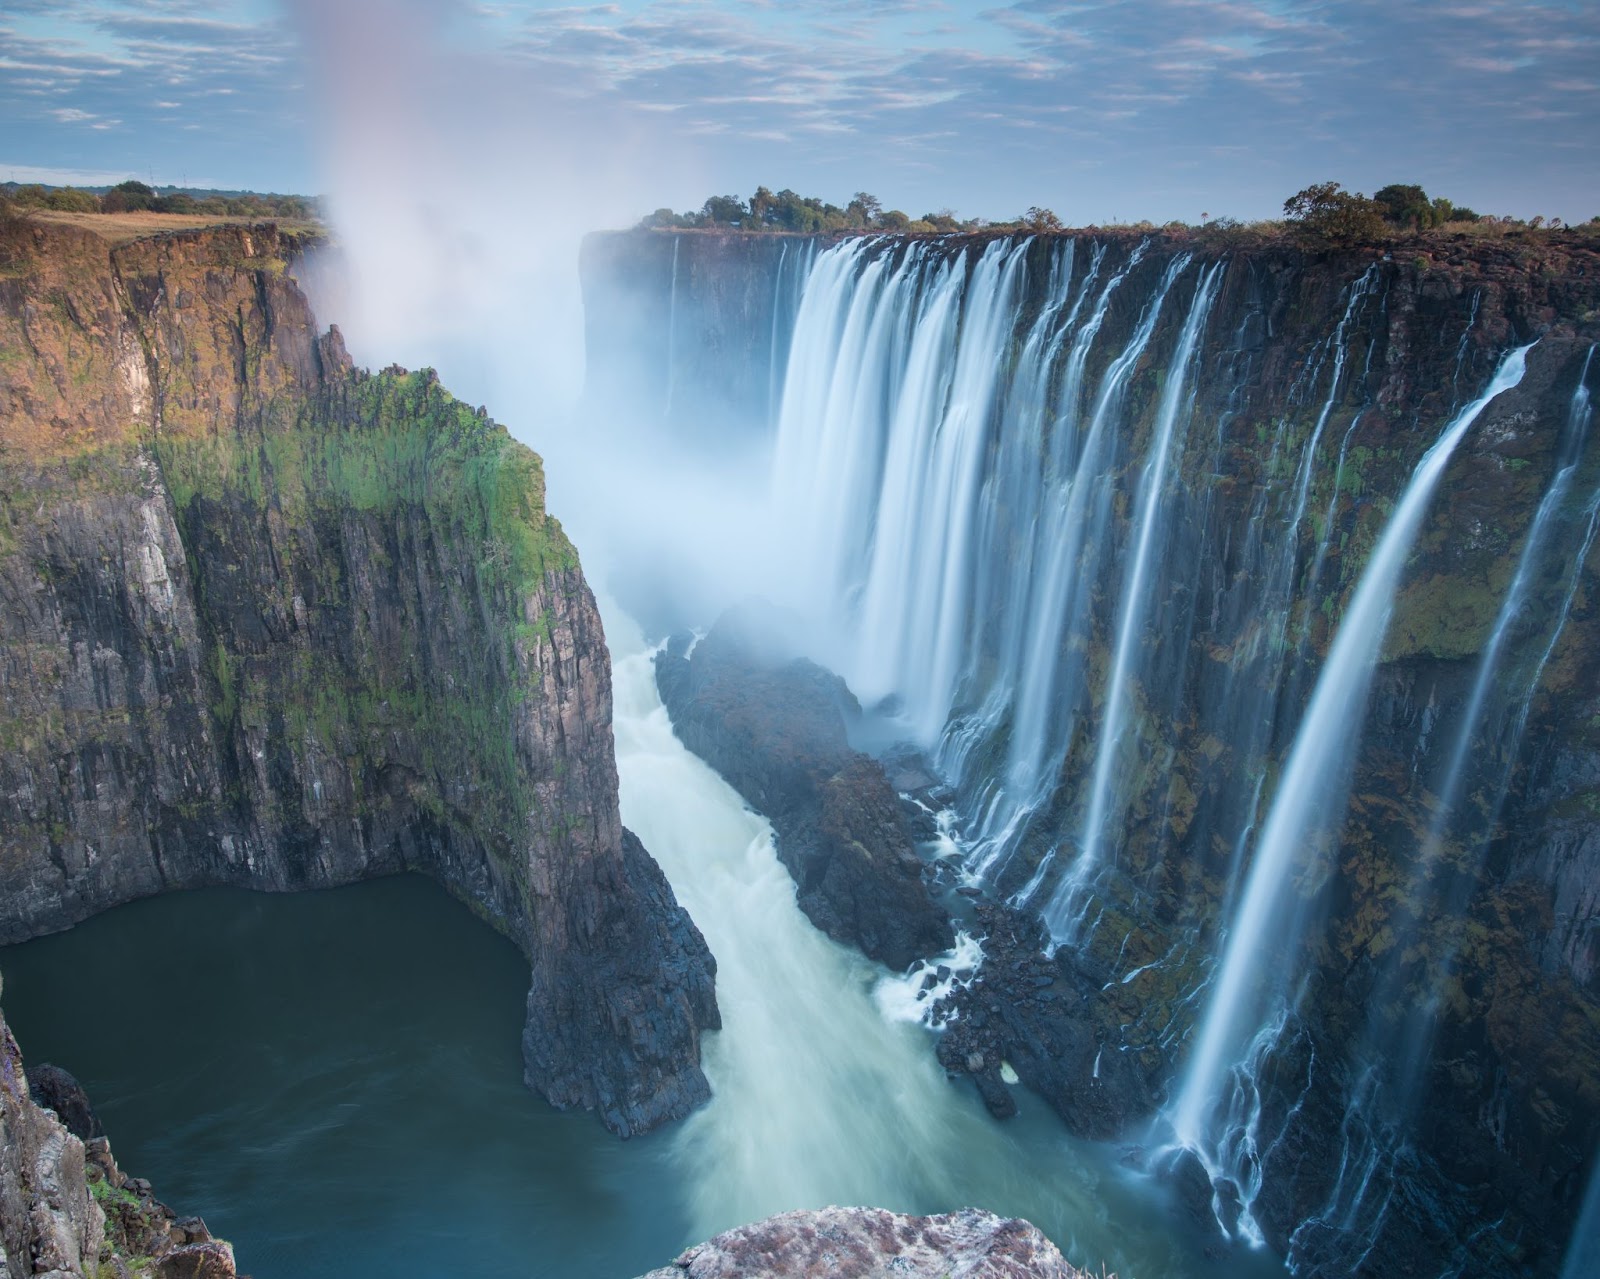 The Vitoria Falls, Zambia/ Zimbabwe - 23 Top Sights to See Before You Die